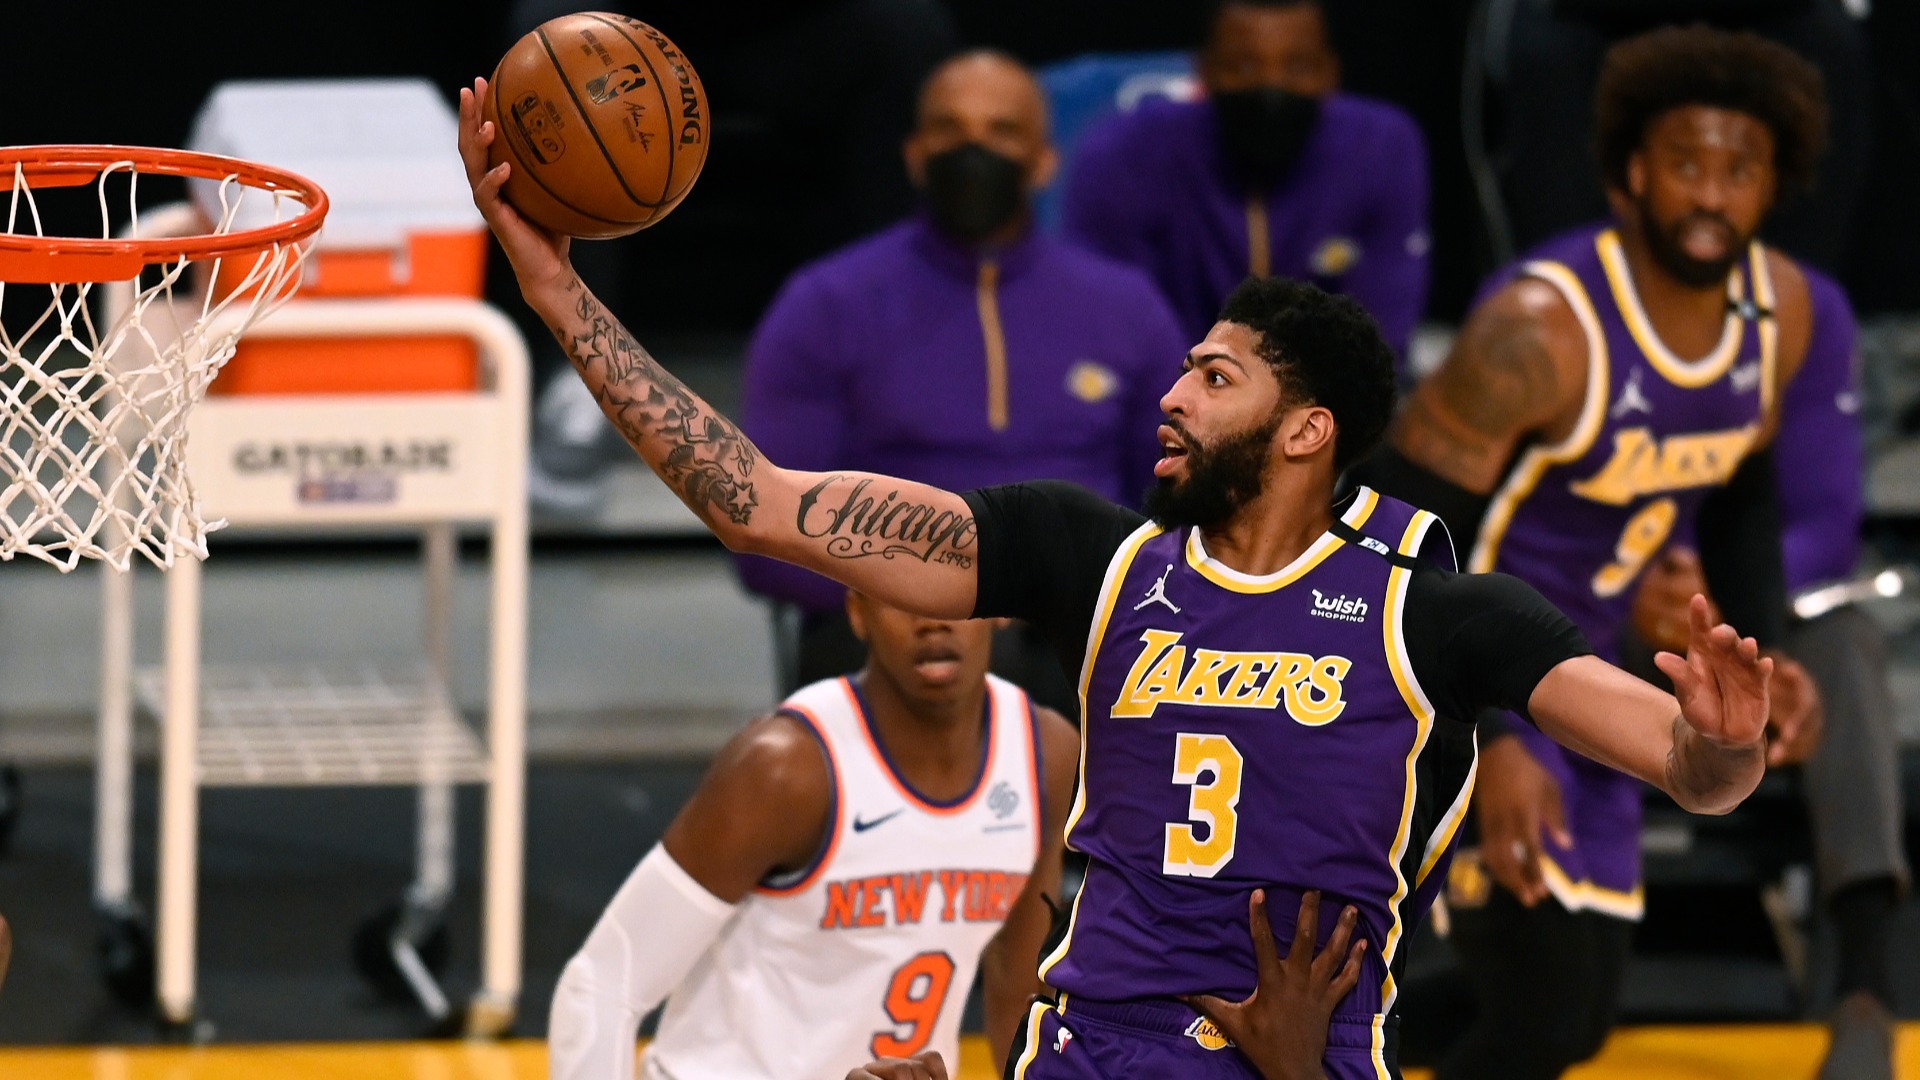 The Los Angeles Lakers have dealt with injuries all season long and will hope Anthony Davis is not forced to miss their next game.